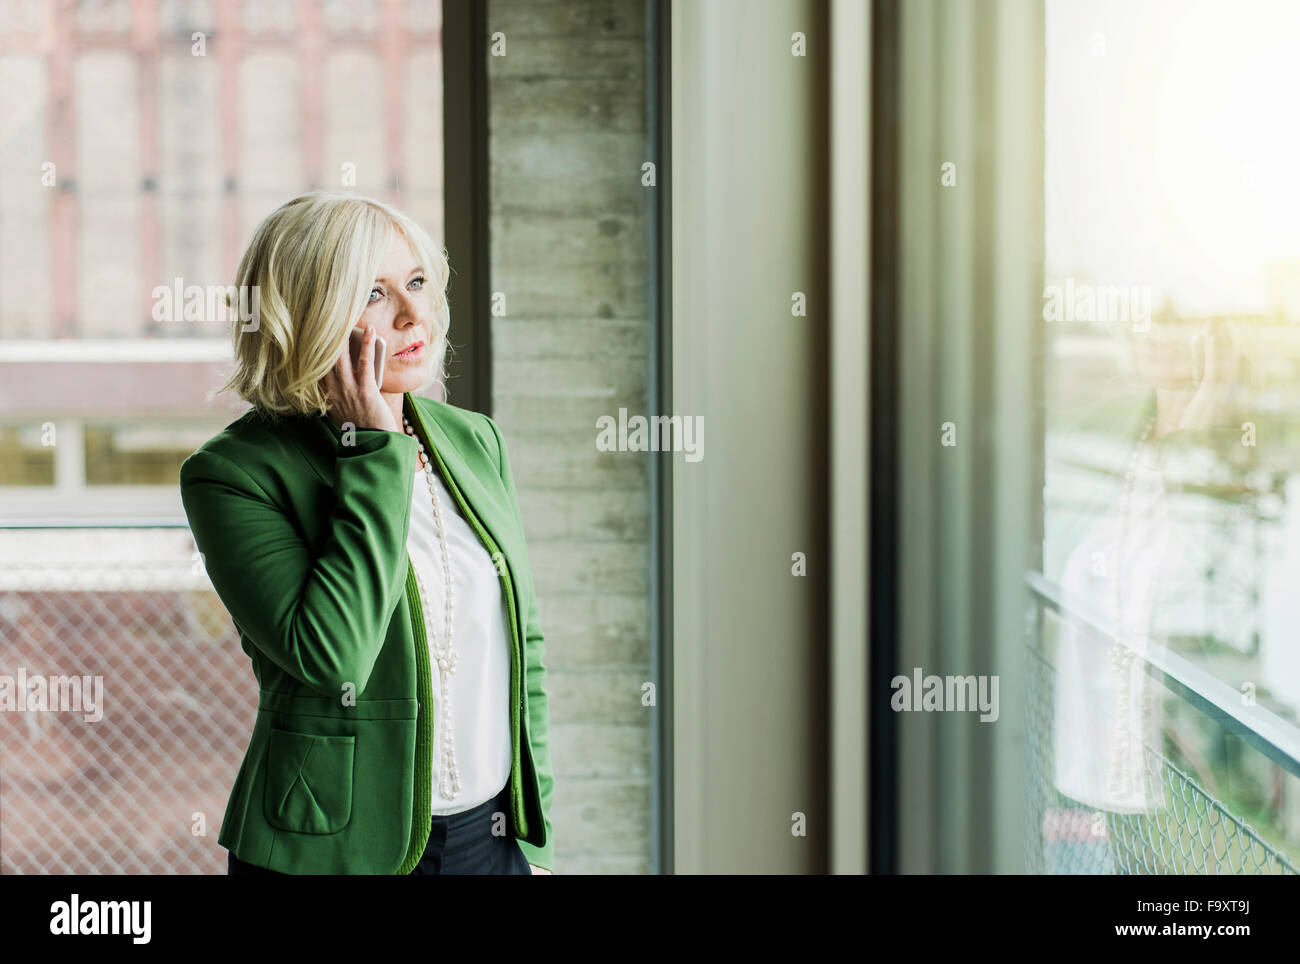 Portrait of blond businesswoman telephoning with smartphone Stock Photo